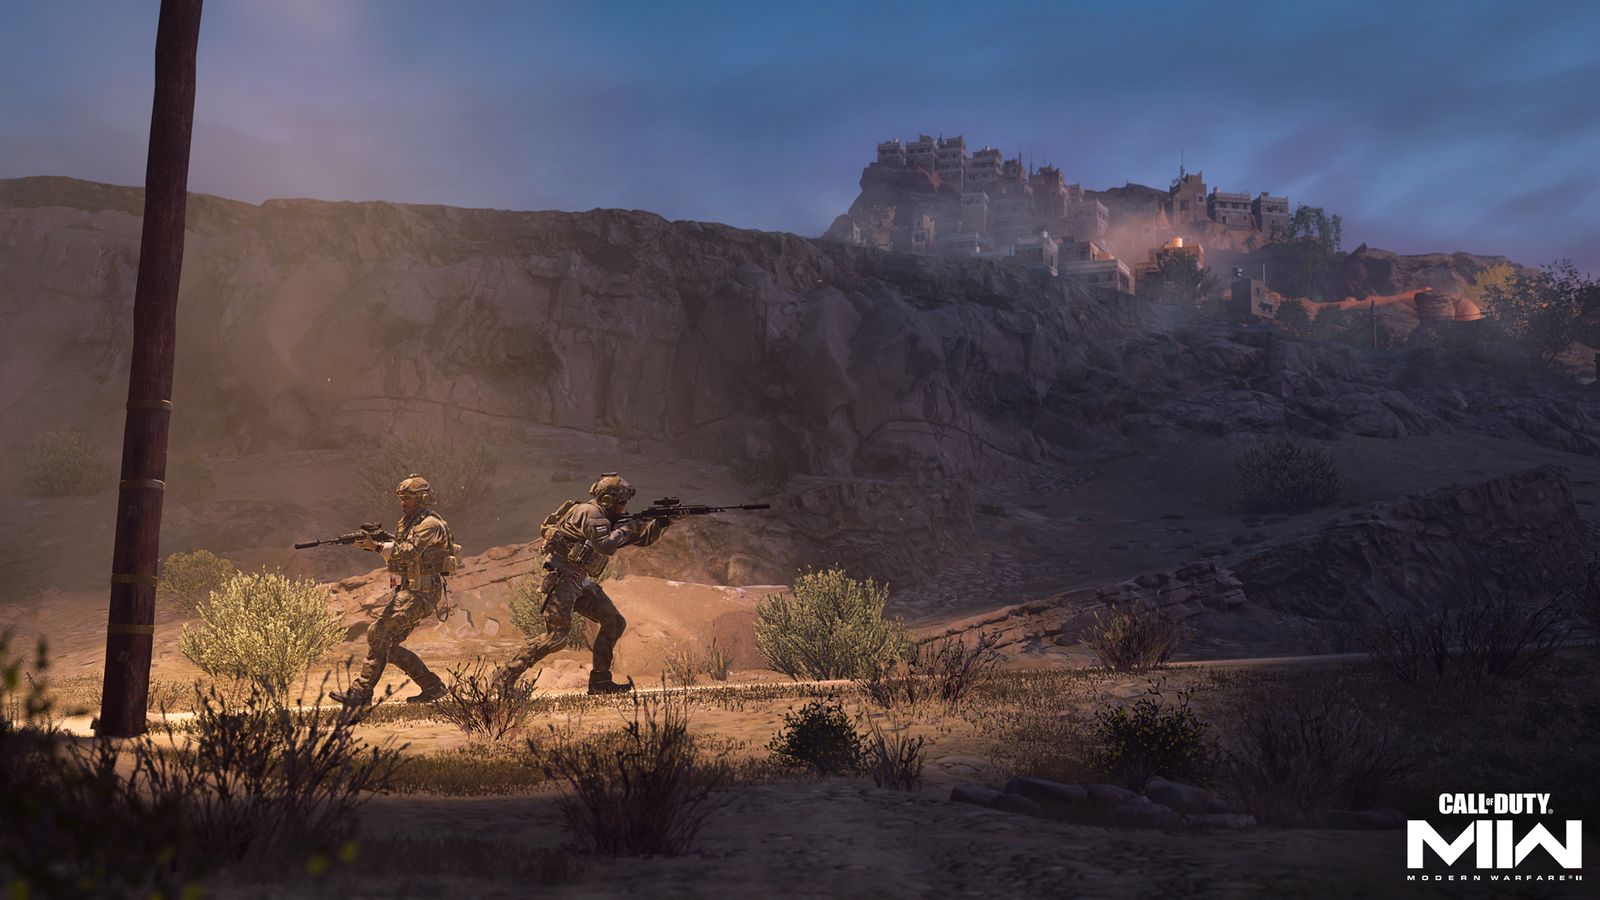 Two soldiers under a street light in a desert. On a hill above them is a settlement - Modern Warfare 2 won't download